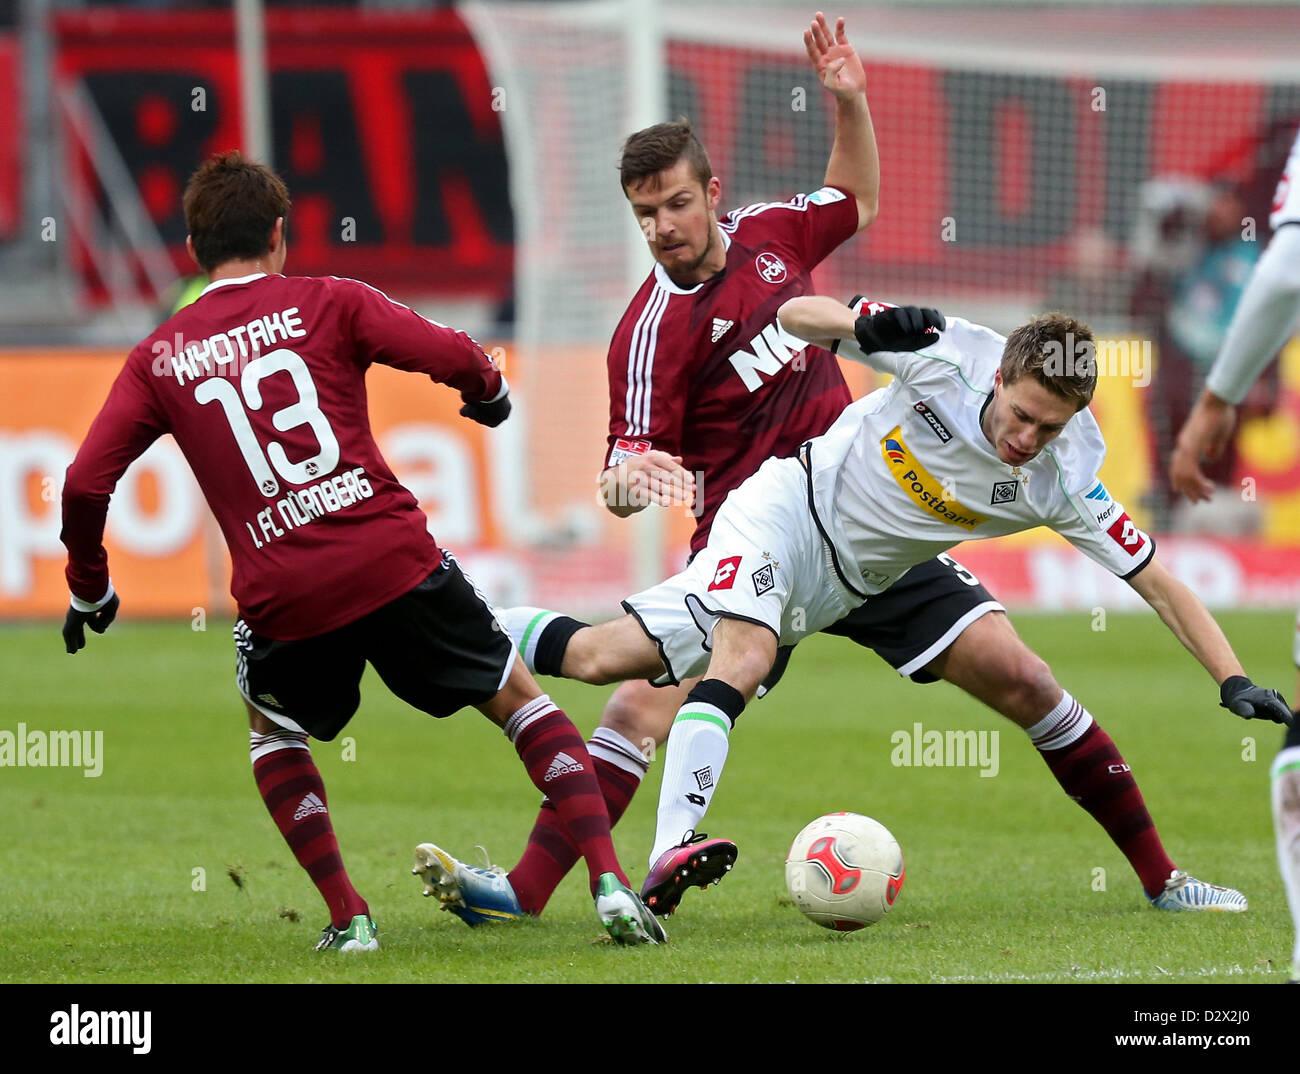 Gladbach's Patrick Herrmann (R) vies for the ball with Nuremberg's  Hiroshi Kiyotake (L) and Per Nilsson (M) during the German Bundesliga soccer match between 1. FC Nuremberg and Borussia Moenchengladbach at Stadium Nuremberg in Nuremberg, Germany, 03 February 2013. Photo: DANIEL KARMANN (ATTENTION: EMBARGO CONDITIONS! The DFL permits the further utilisation of up to 15 pictures only (no sequential pictures or video-similar series of pictures allowed) via the internet and online media during the match (including halftime), taken from inside the stadium and/or prior to the start of the match. T Stock Photo